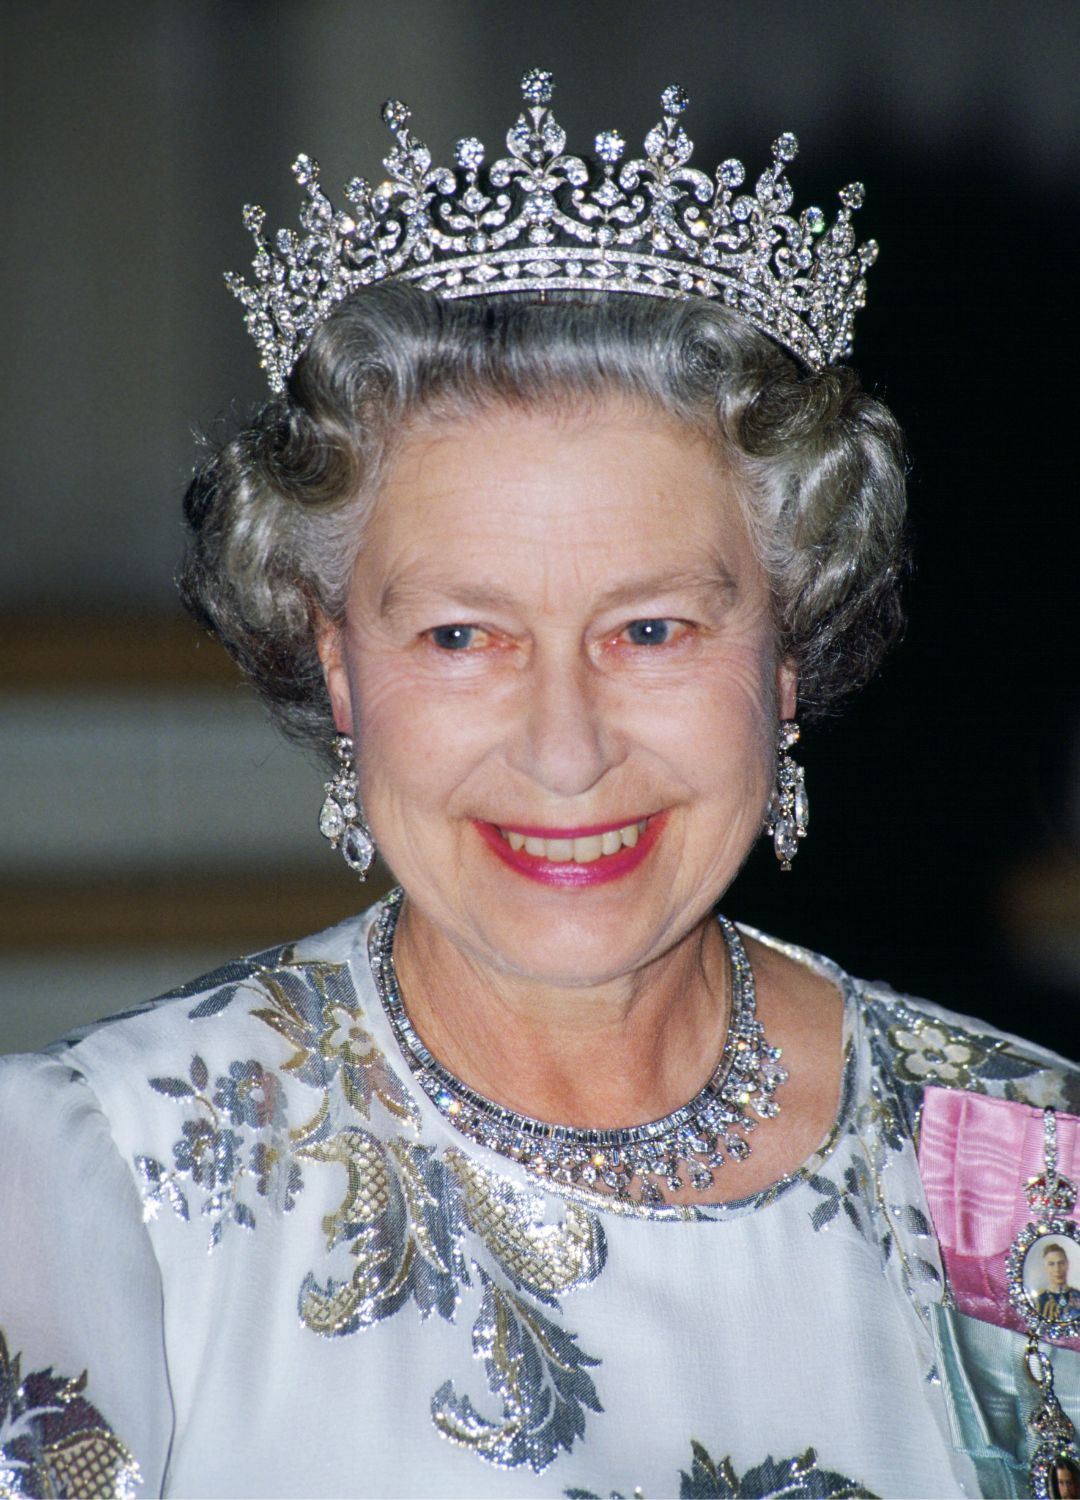 <p>                     Queen Elizabeth paired her white and silver embroidered evening dress with the iconic Queen Mary's Girls of Great Britain and Ireland tiara at a banquet in Paris in 2008. A vision in silver, she positively glowed in the statement tiara with matching diamond earrings and necklace.                   </p>